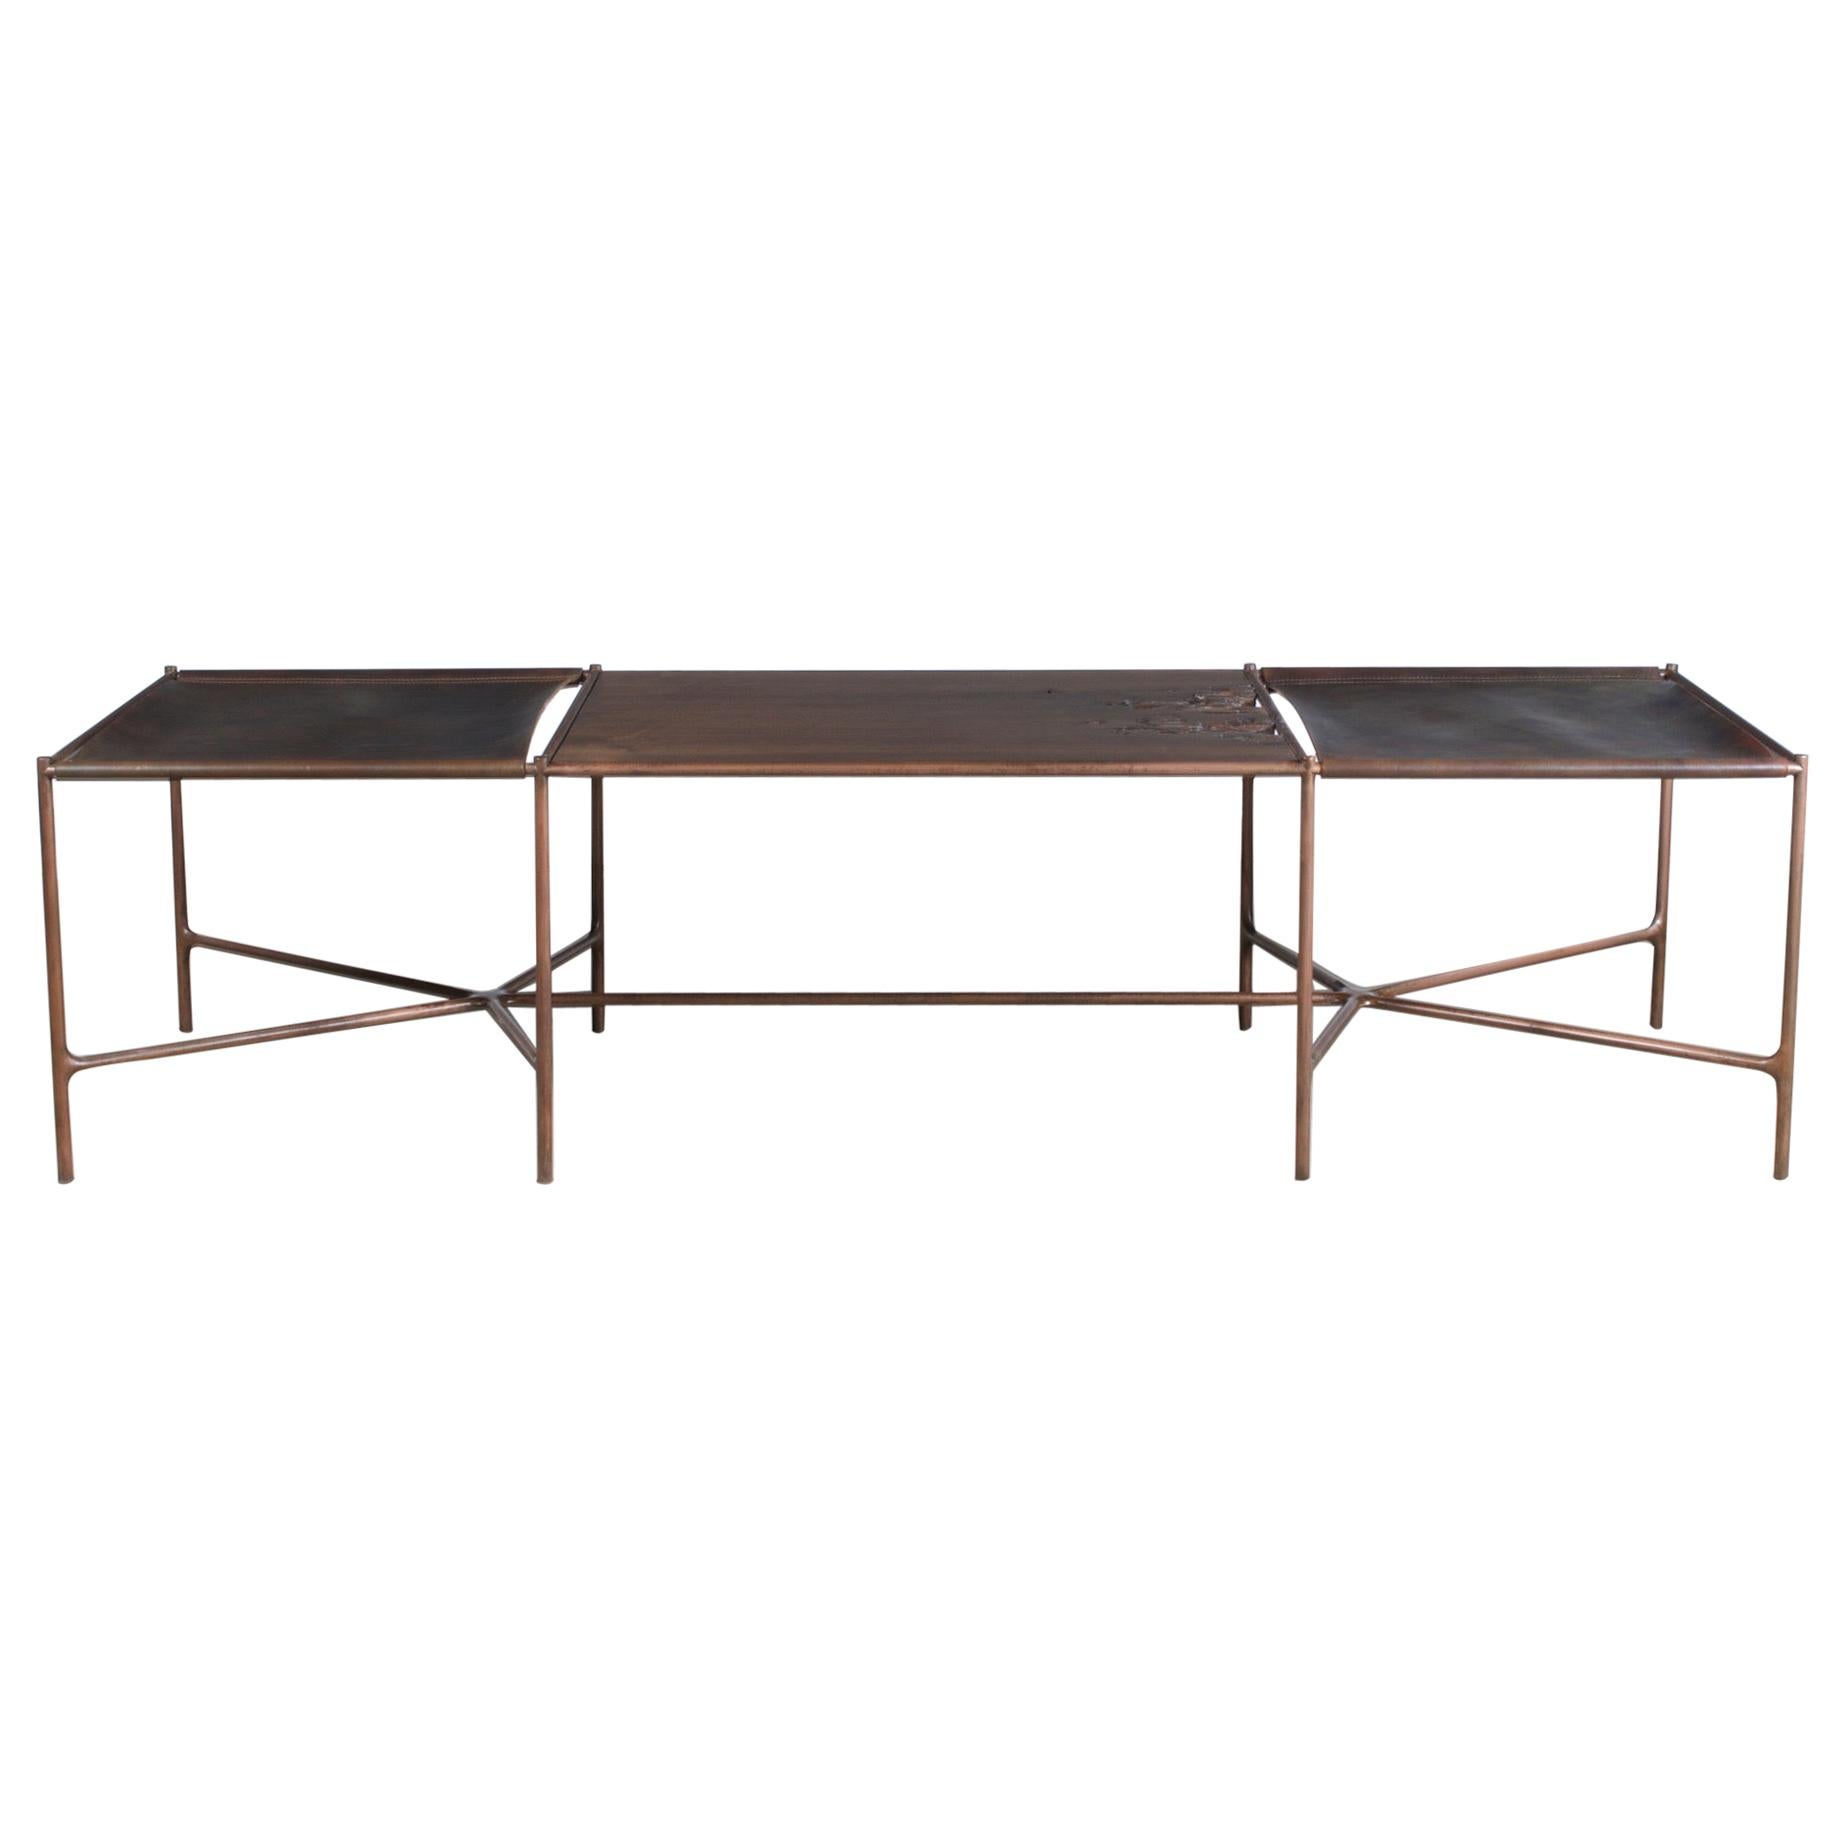 Web Series Cast Bronze, Saddle Leather and Wood Bench by Modern Industry Design For Sale